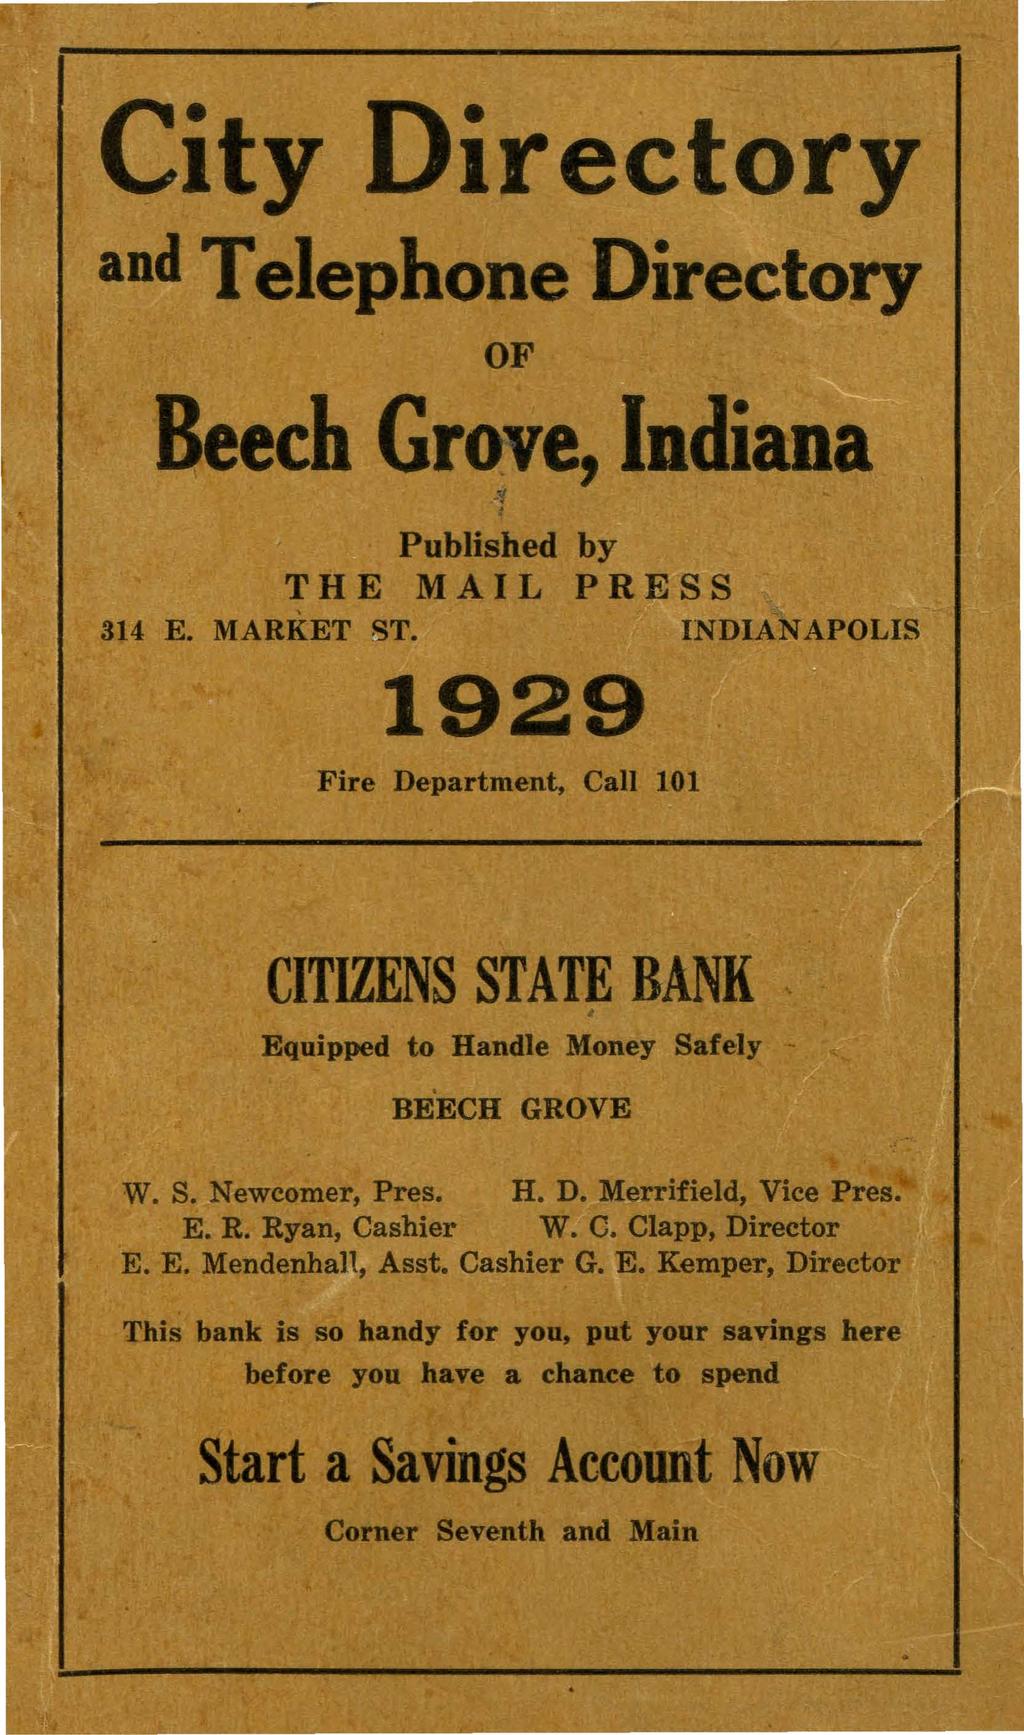 City Directory and Telephone Directory OF Beech Grove, Indiana -r Published by THE MAIL PR~SS 314 E MARKET,ST INDIANAPOLIS 1929 Fire Department, Call 101 CITIZENS STATE BANK, Equipped to Handle Money